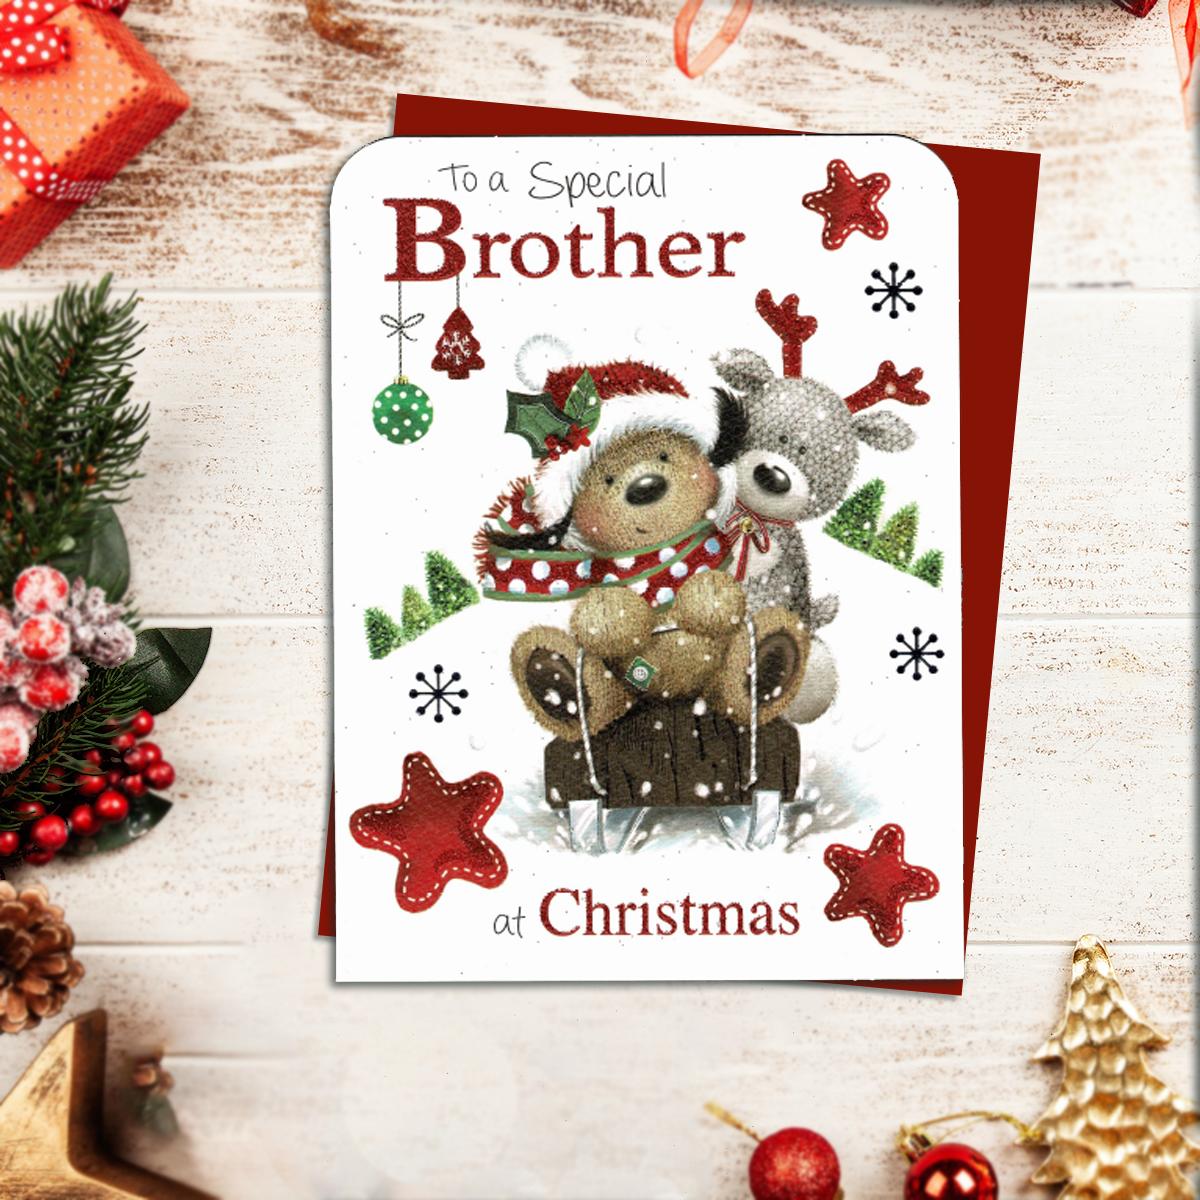 Special Brother Christmas Card Alongside Its Red Envelope